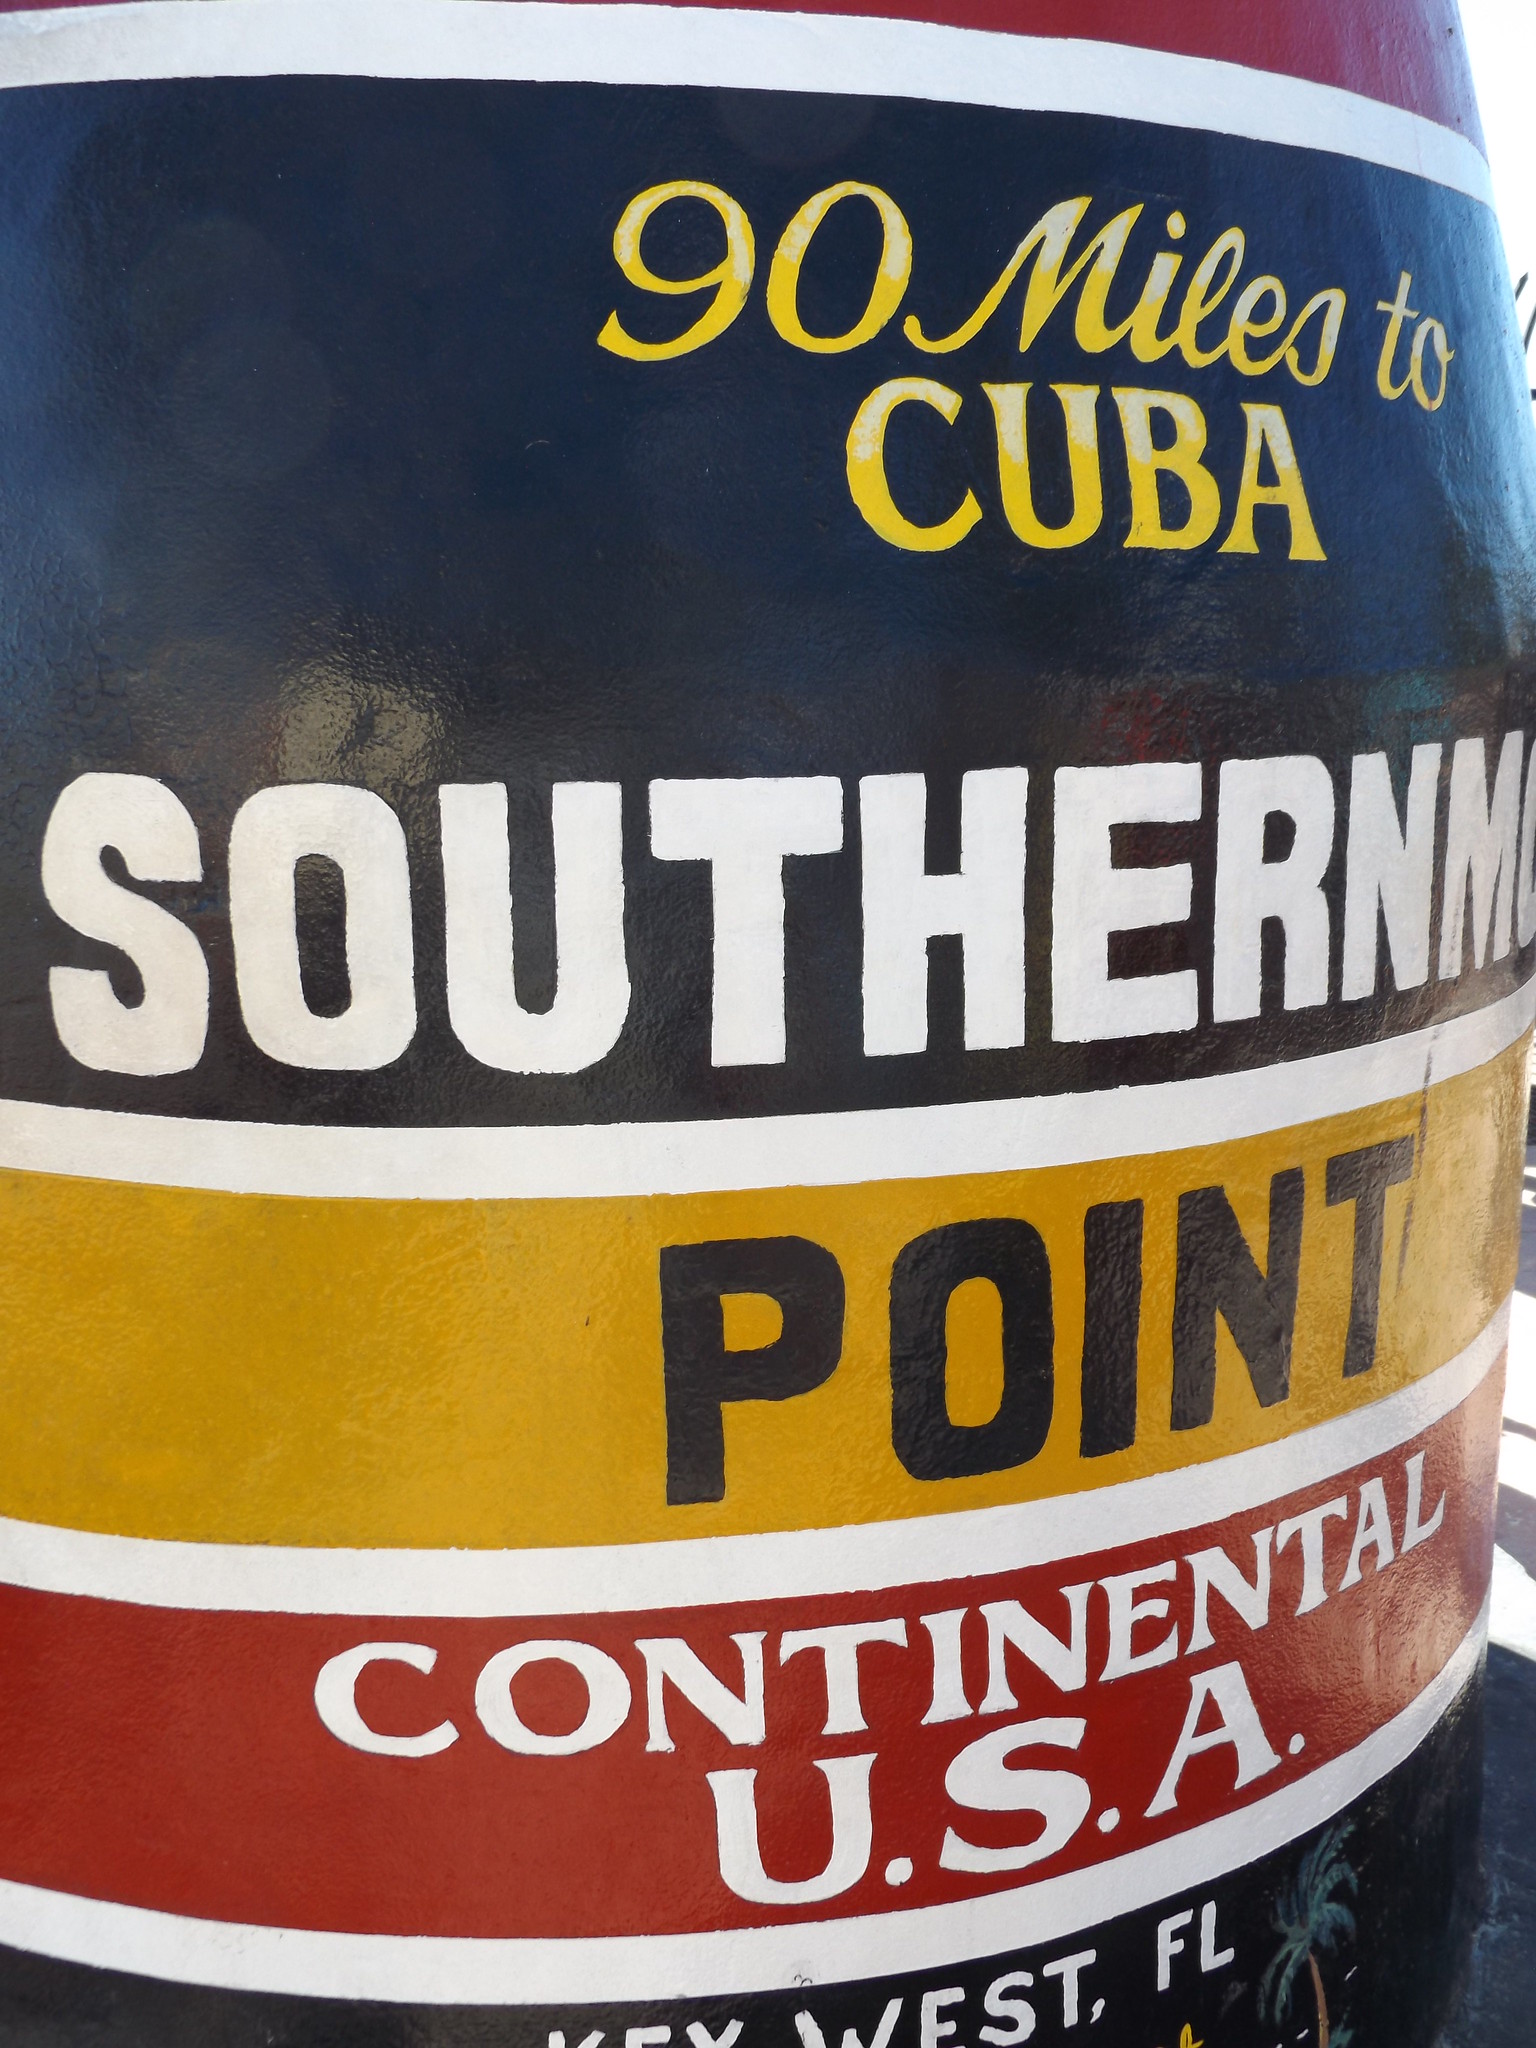 Southernmost Point Marker, Key West, Florida, United States, 28 December 2019